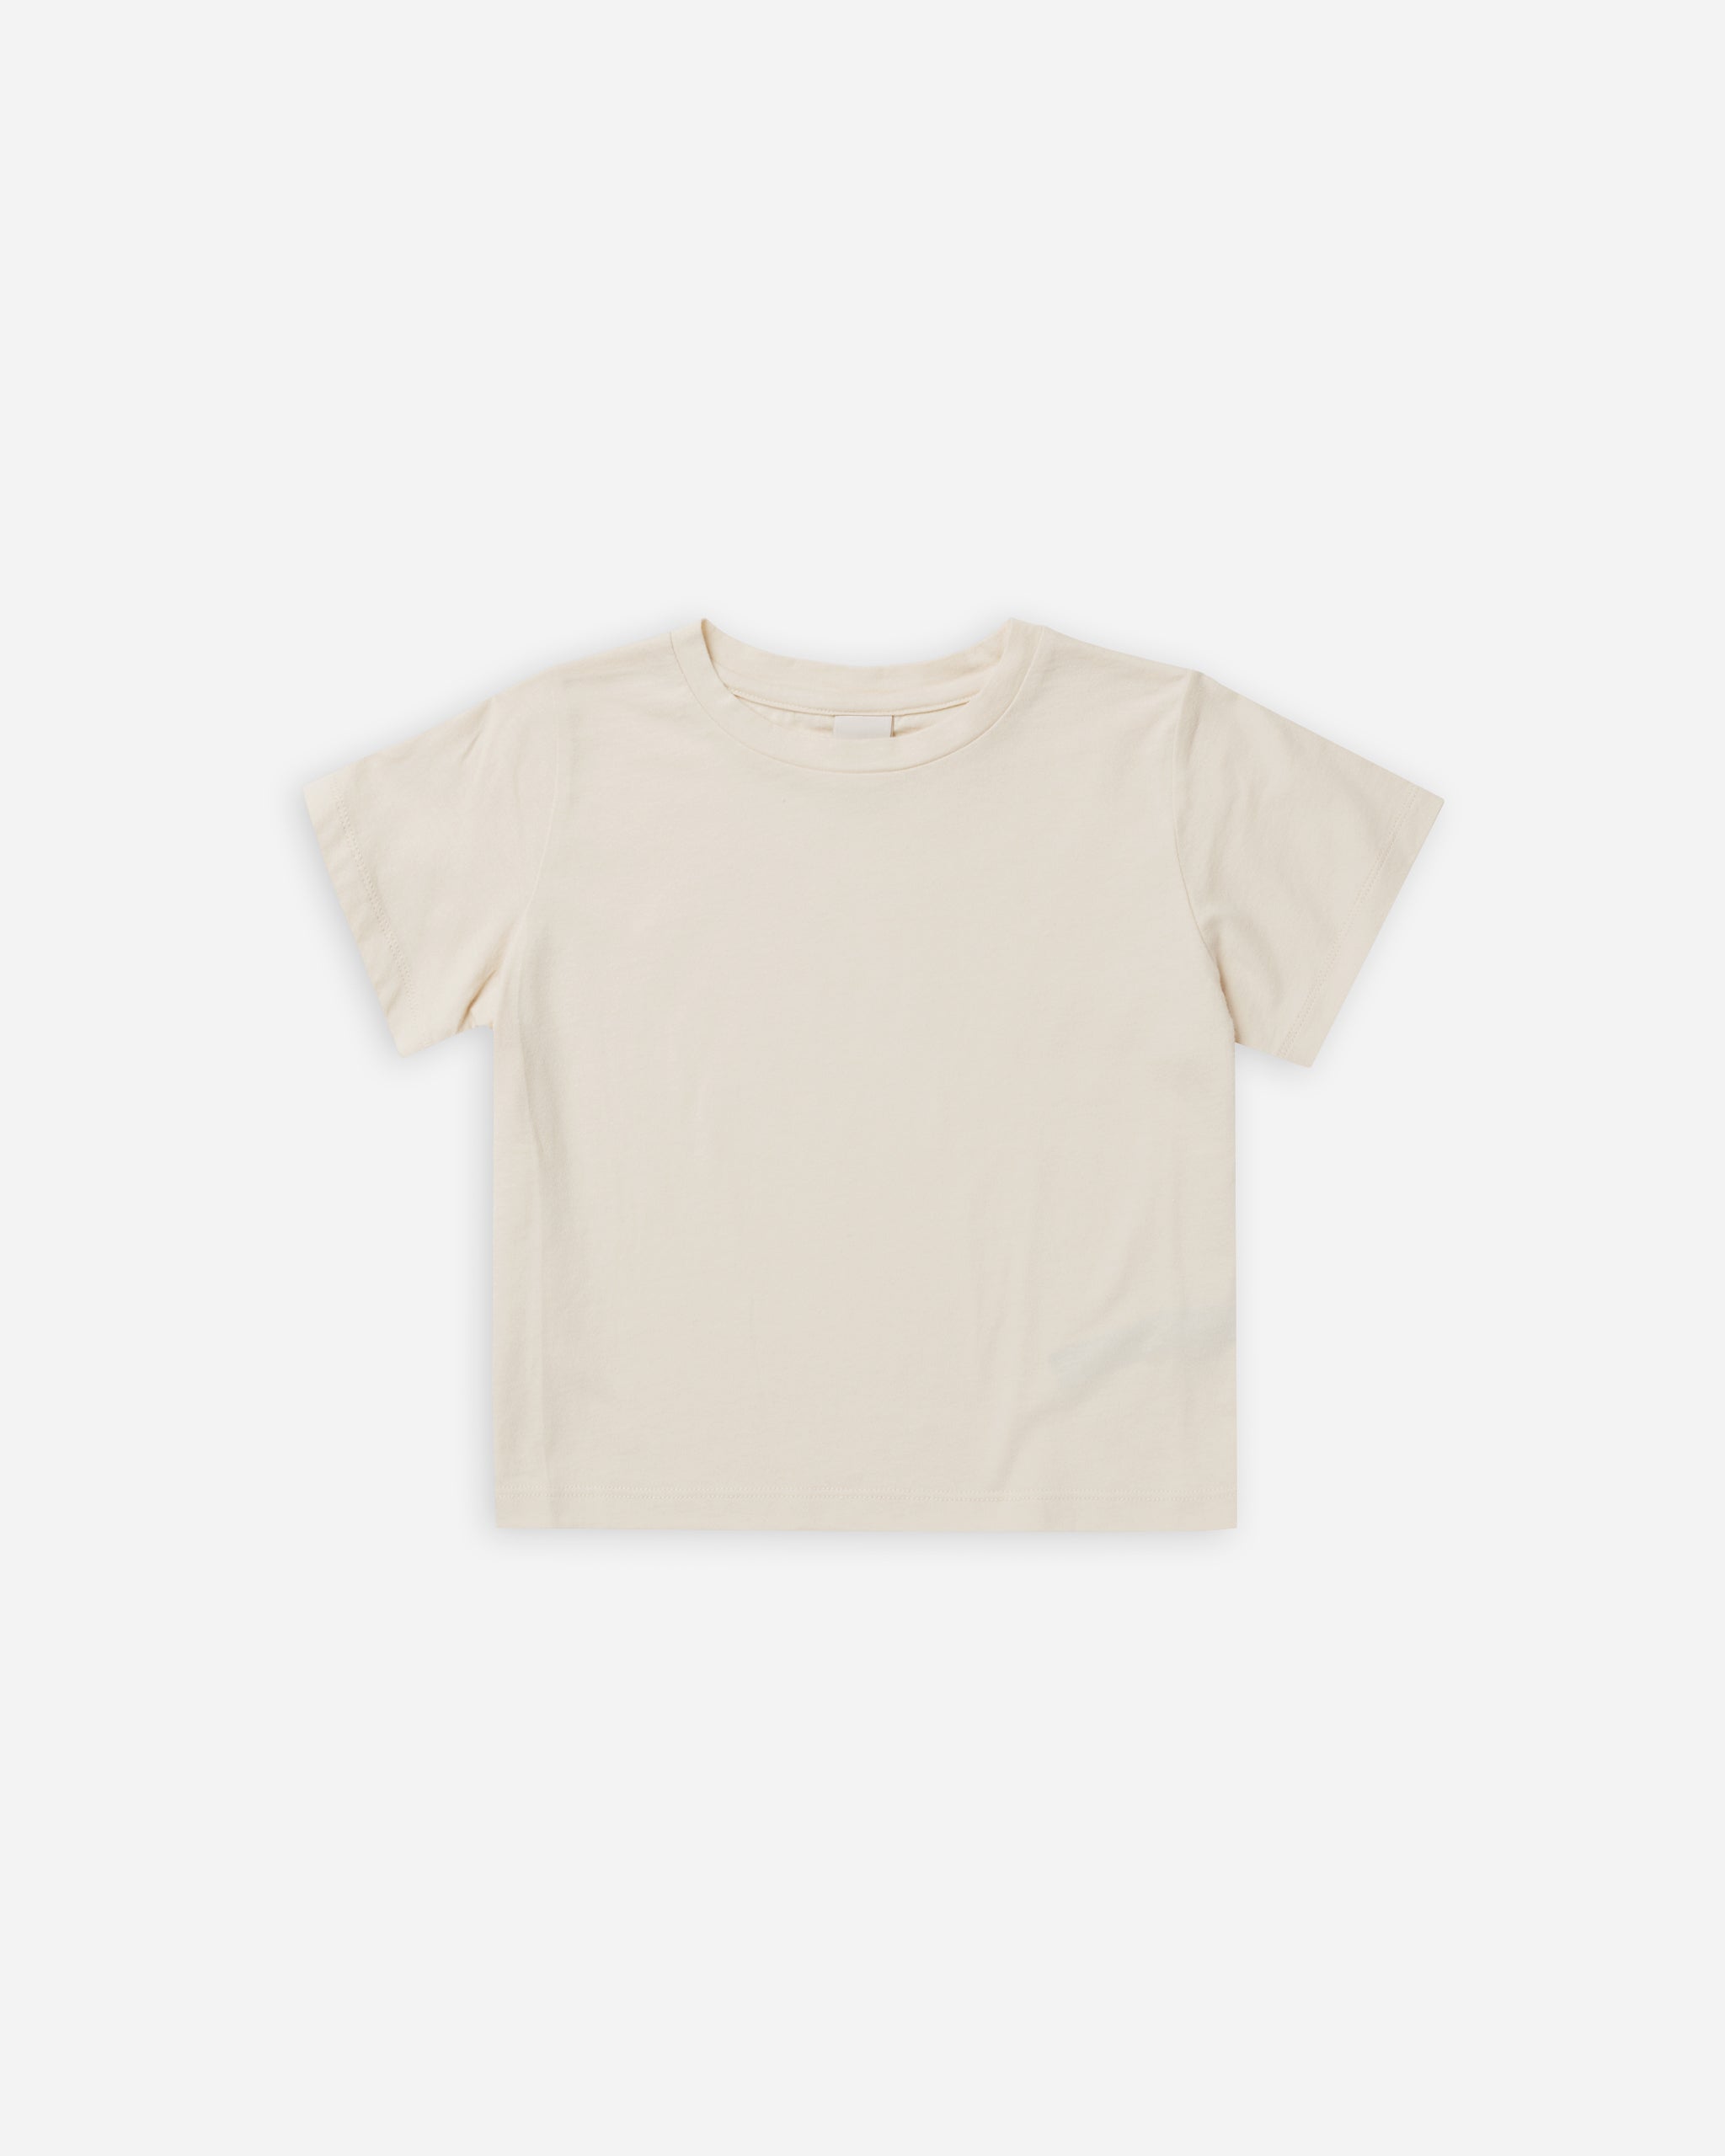 Torrey Essential Tee | Natural - Rylee + Cru | Kids Clothes | Trendy Baby Clothes | Modern Infant Outfits |